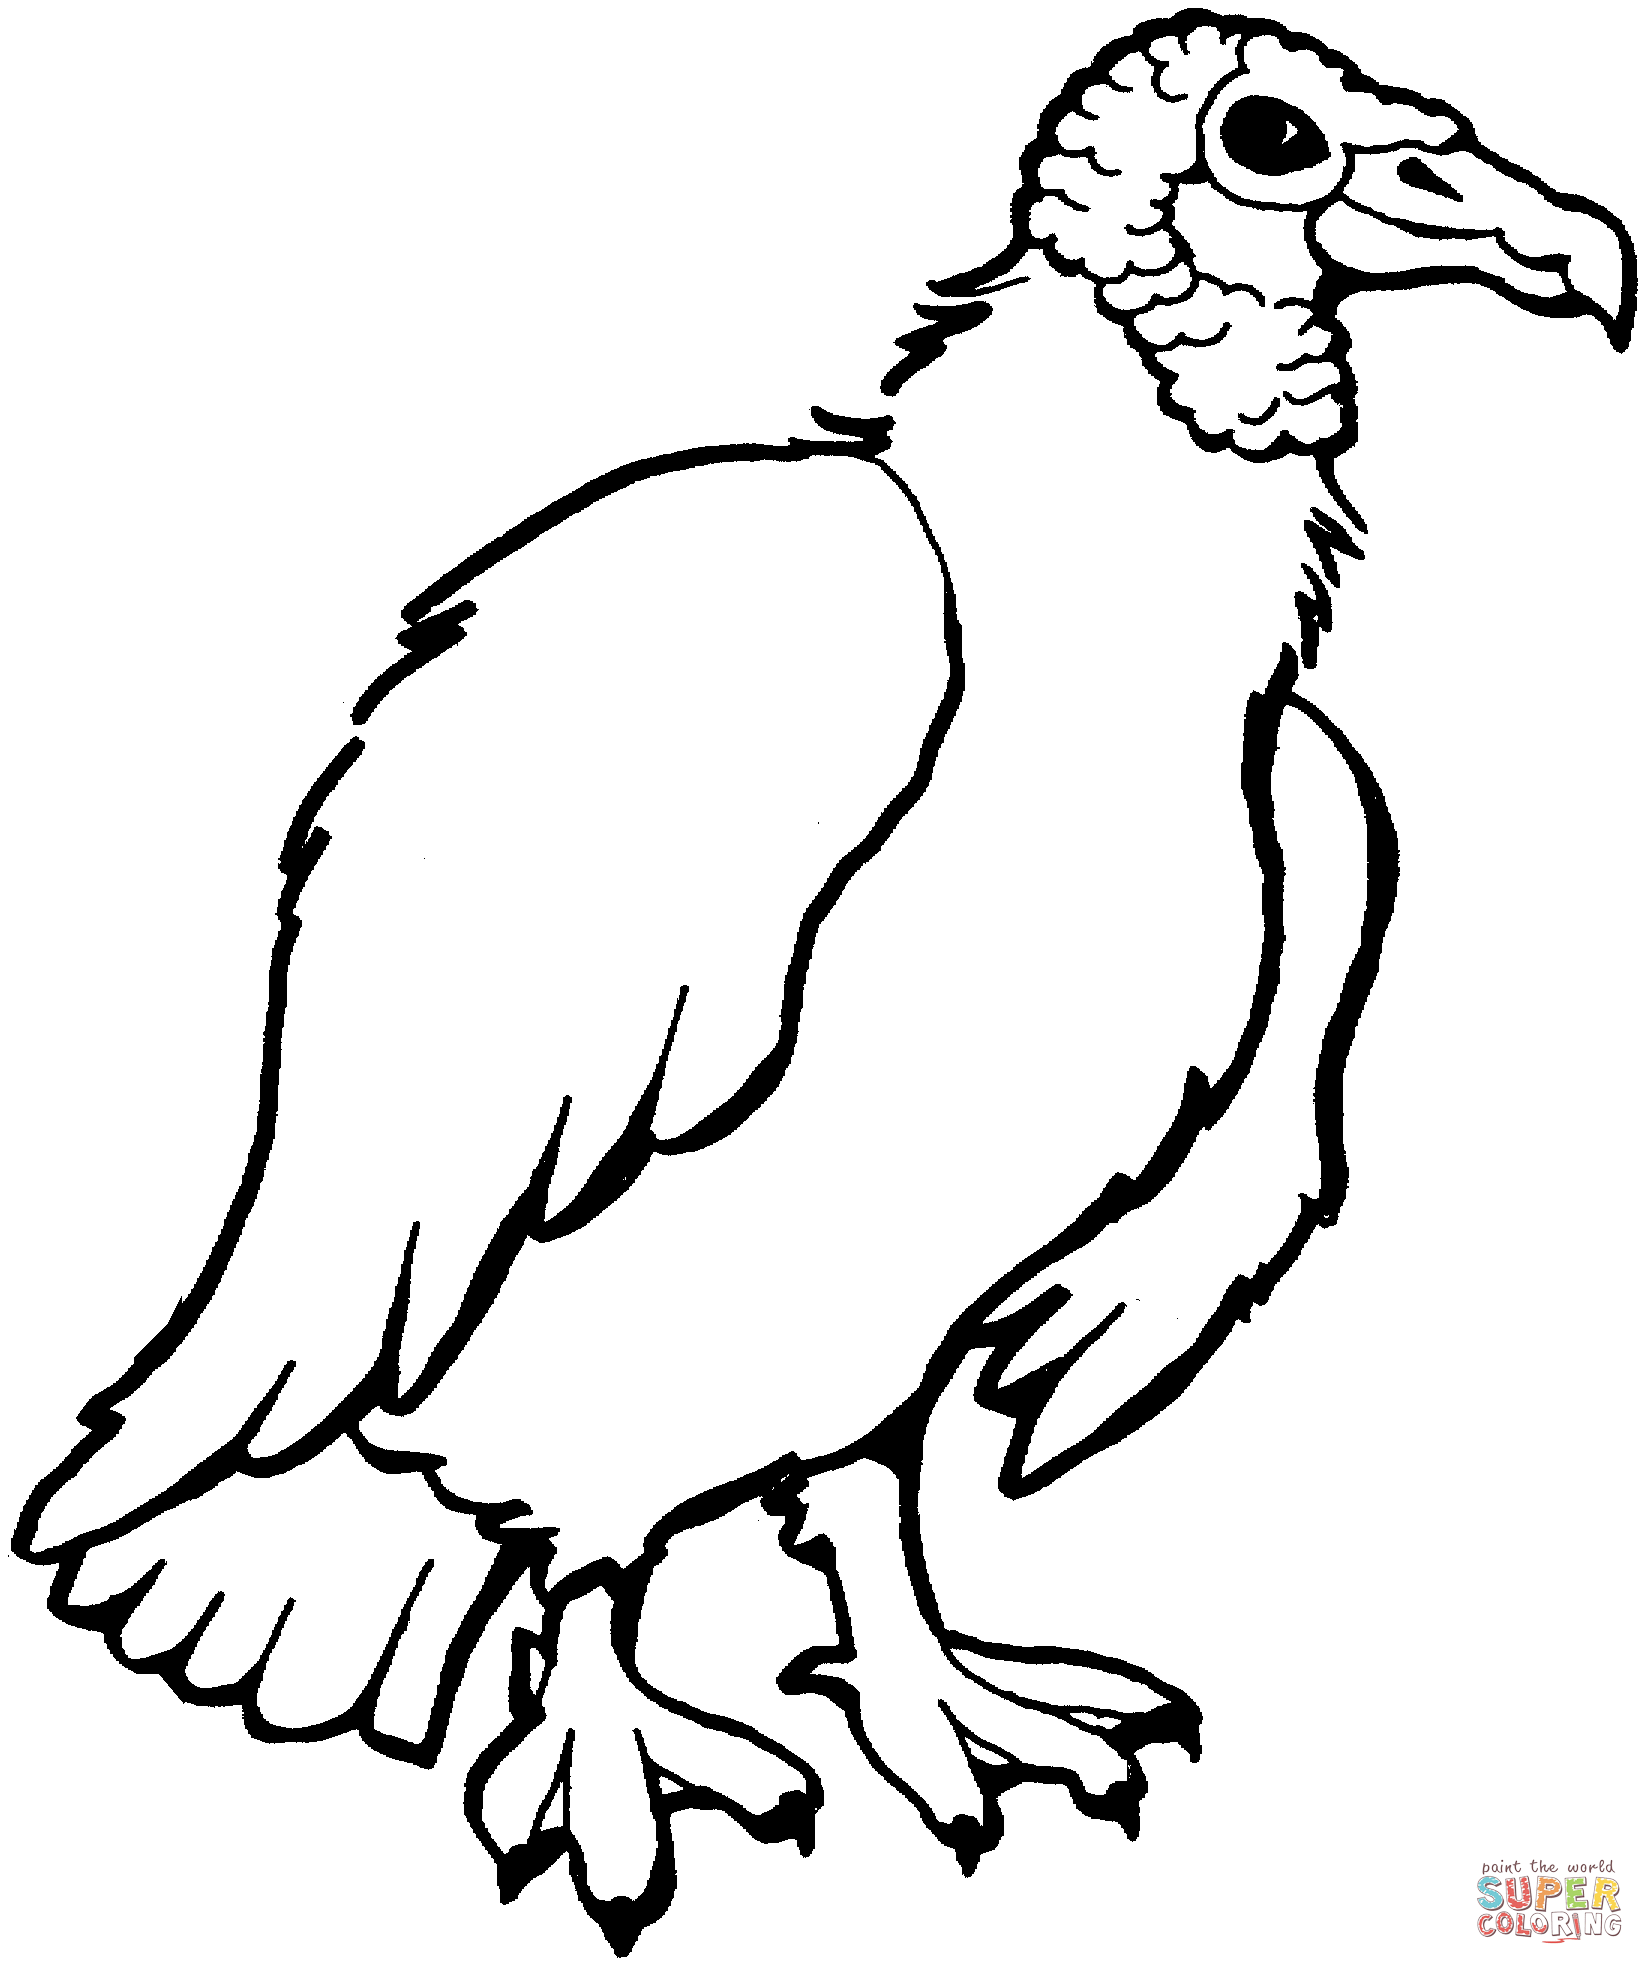 Turkey Vulture coloring #6, Download drawings